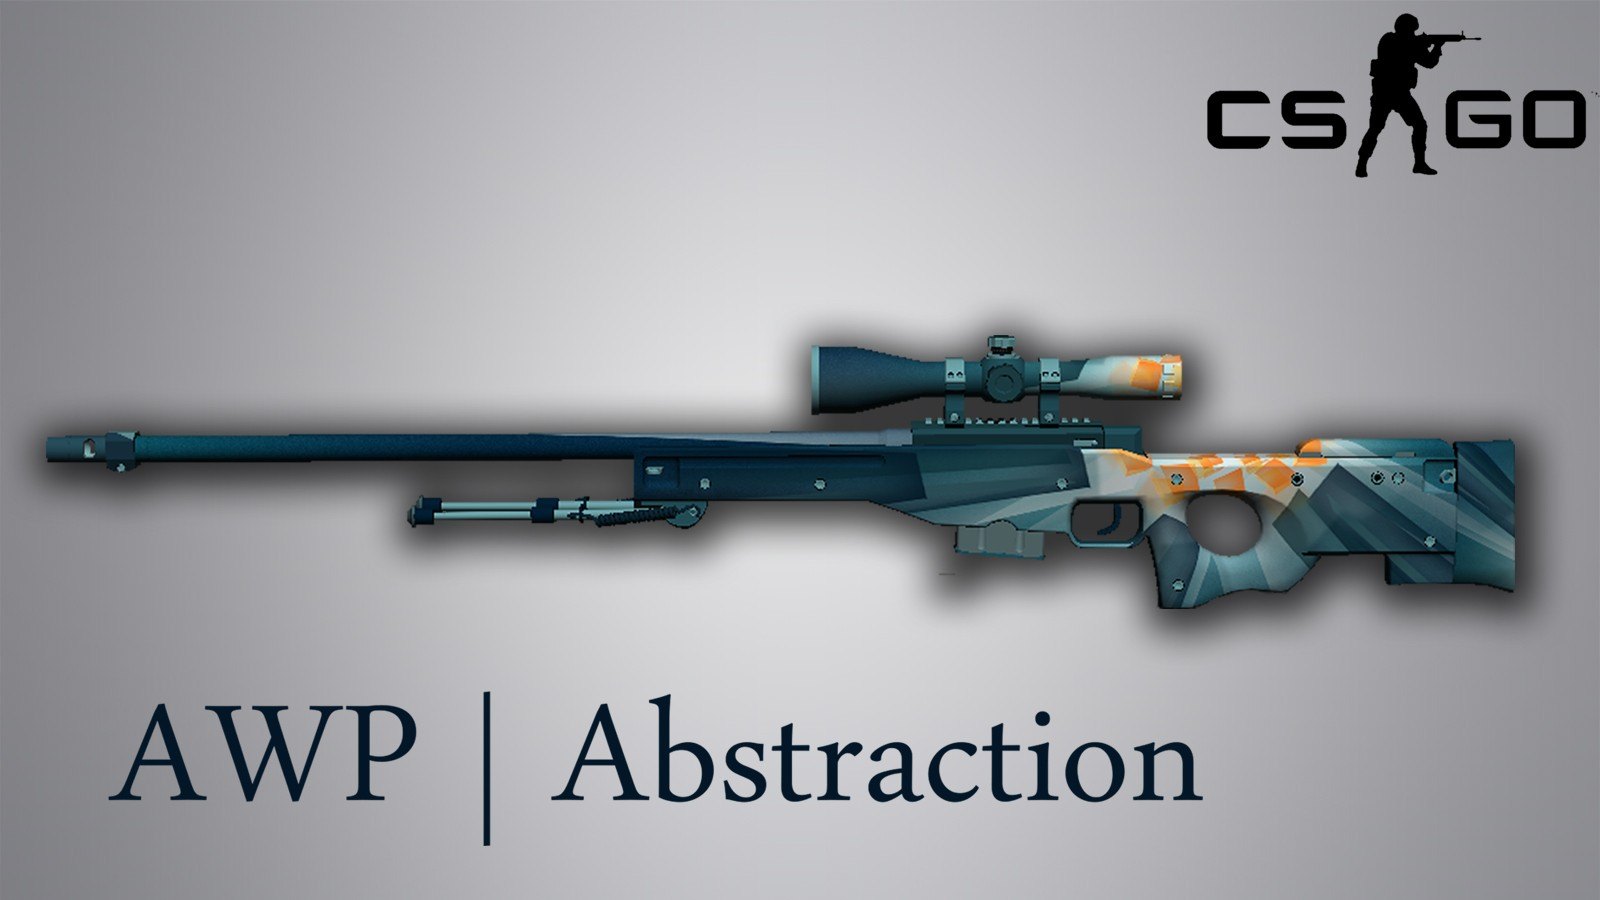 Awp cannons карта мастерская фото 32